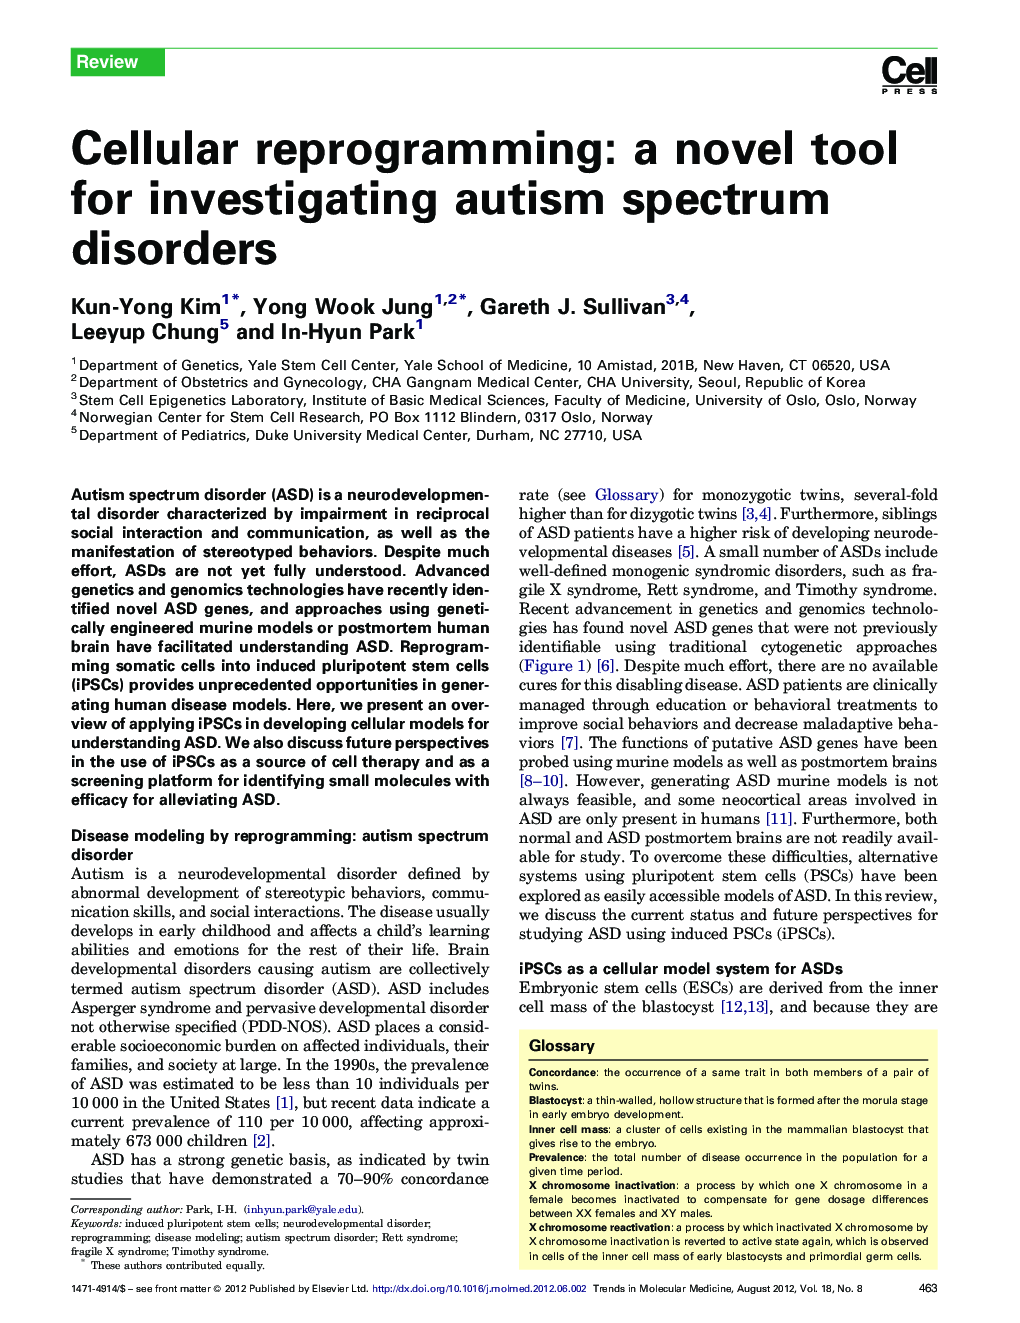 Cellular reprogramming: a novel tool for investigating autism spectrum disorders